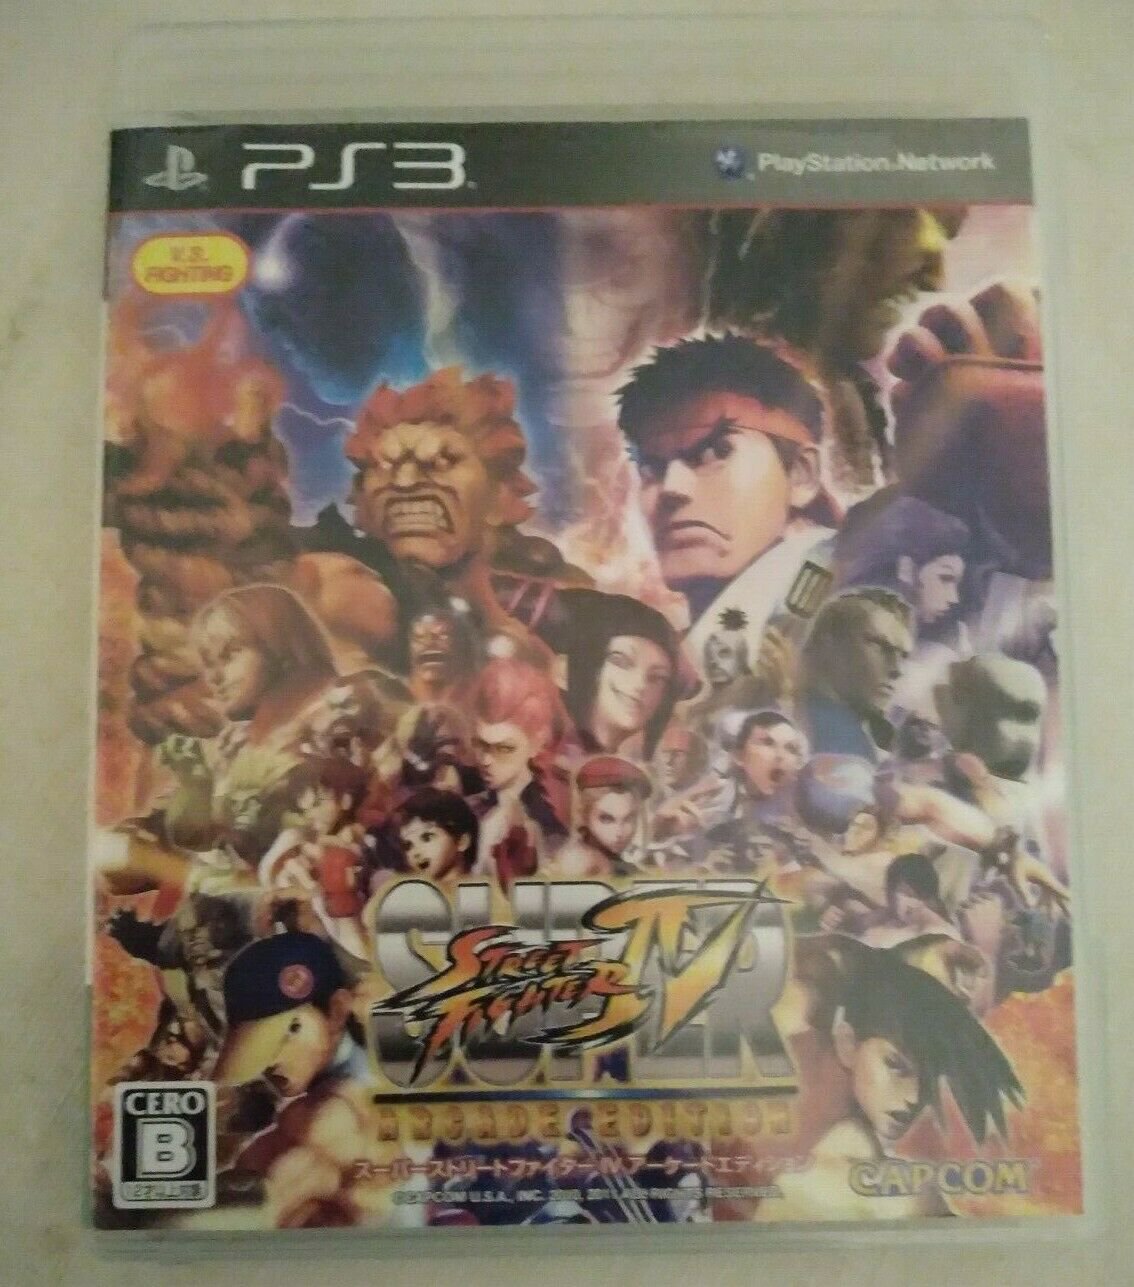 Super Street Fighter IV Arcade Edition Playstation 3 W/Manual Japan Import PS3